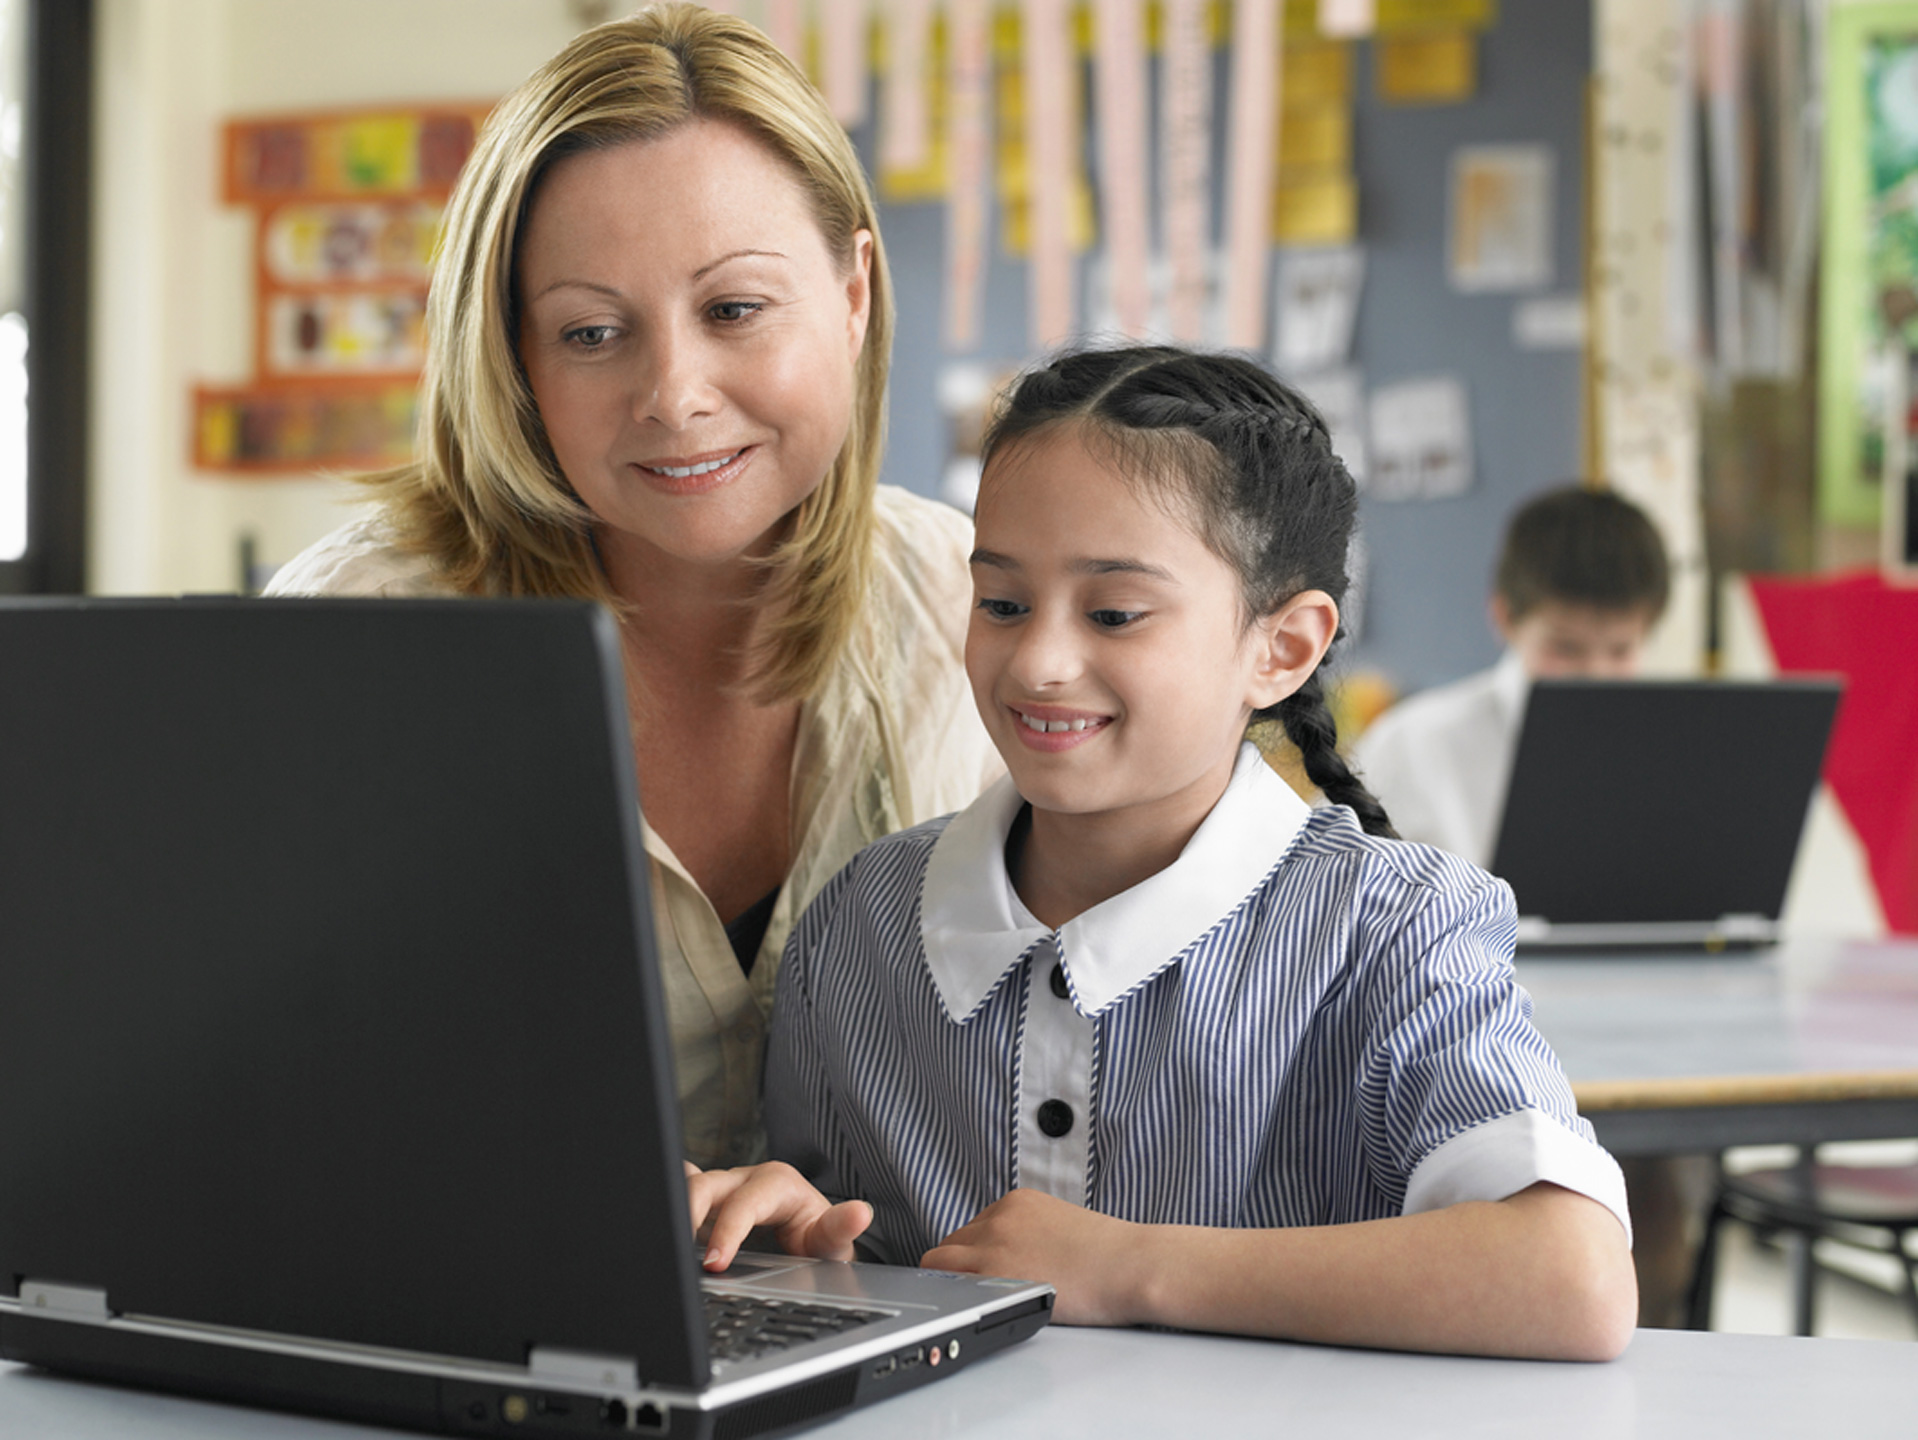 Young-School-Girl-on-Laptop-with-Teacher1440